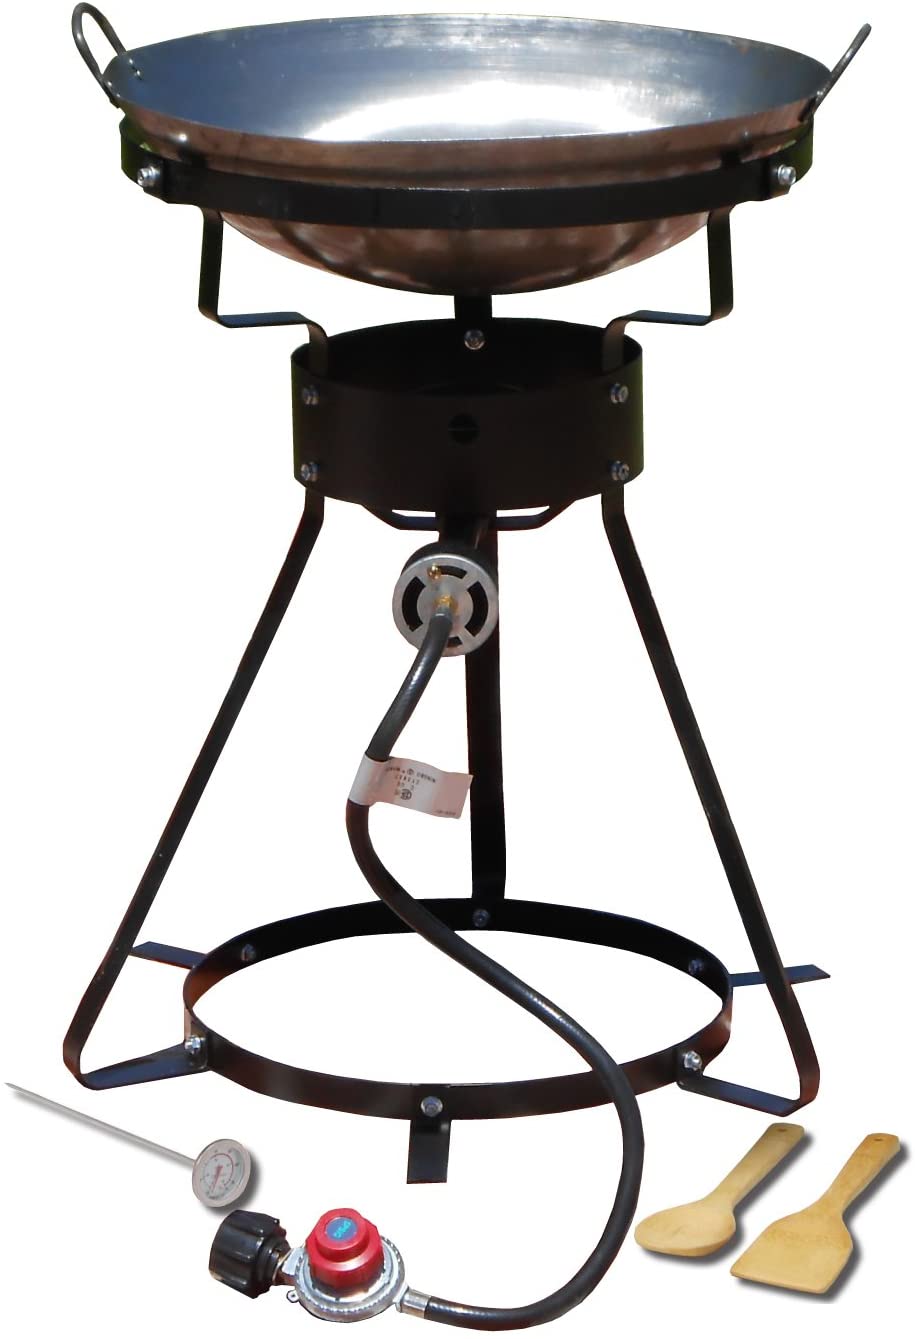 King Kooker 24WC 12" Portable Propane Outdoor Cooker with Wok